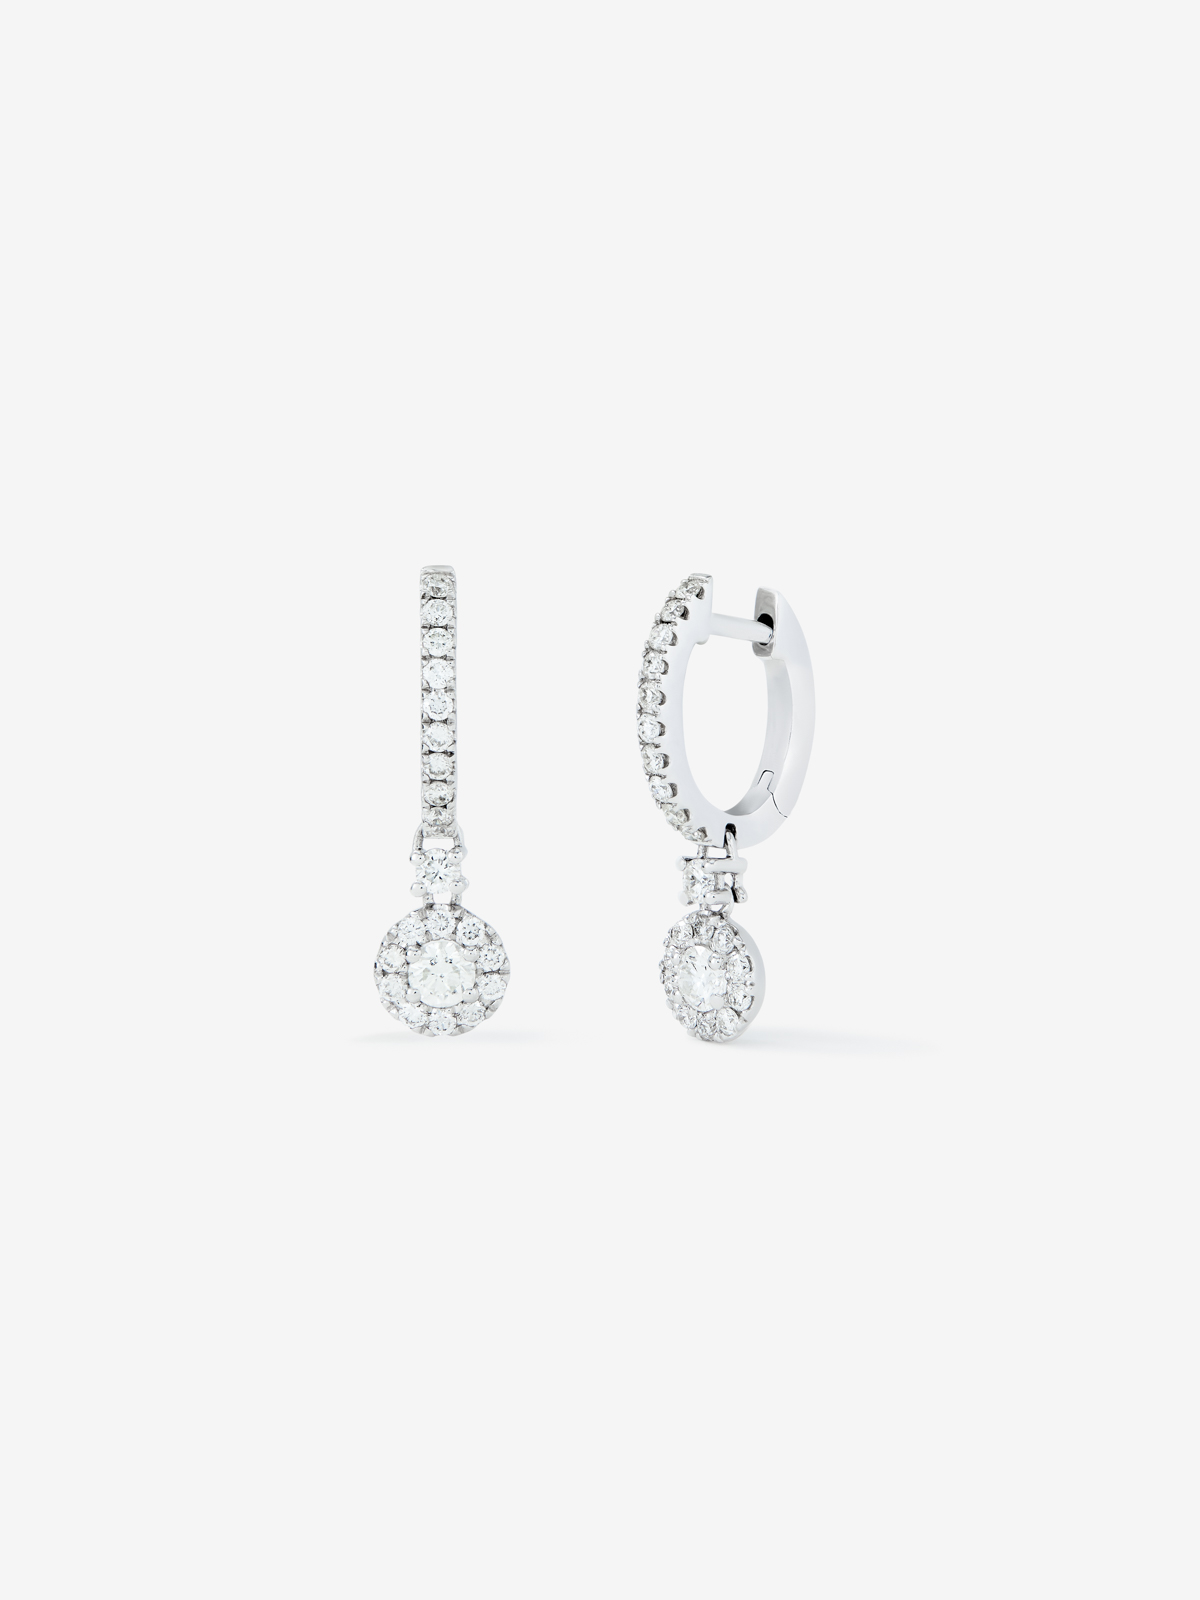 Hoop earrings with solitary pendant encircled by 18K white gold with diamonds